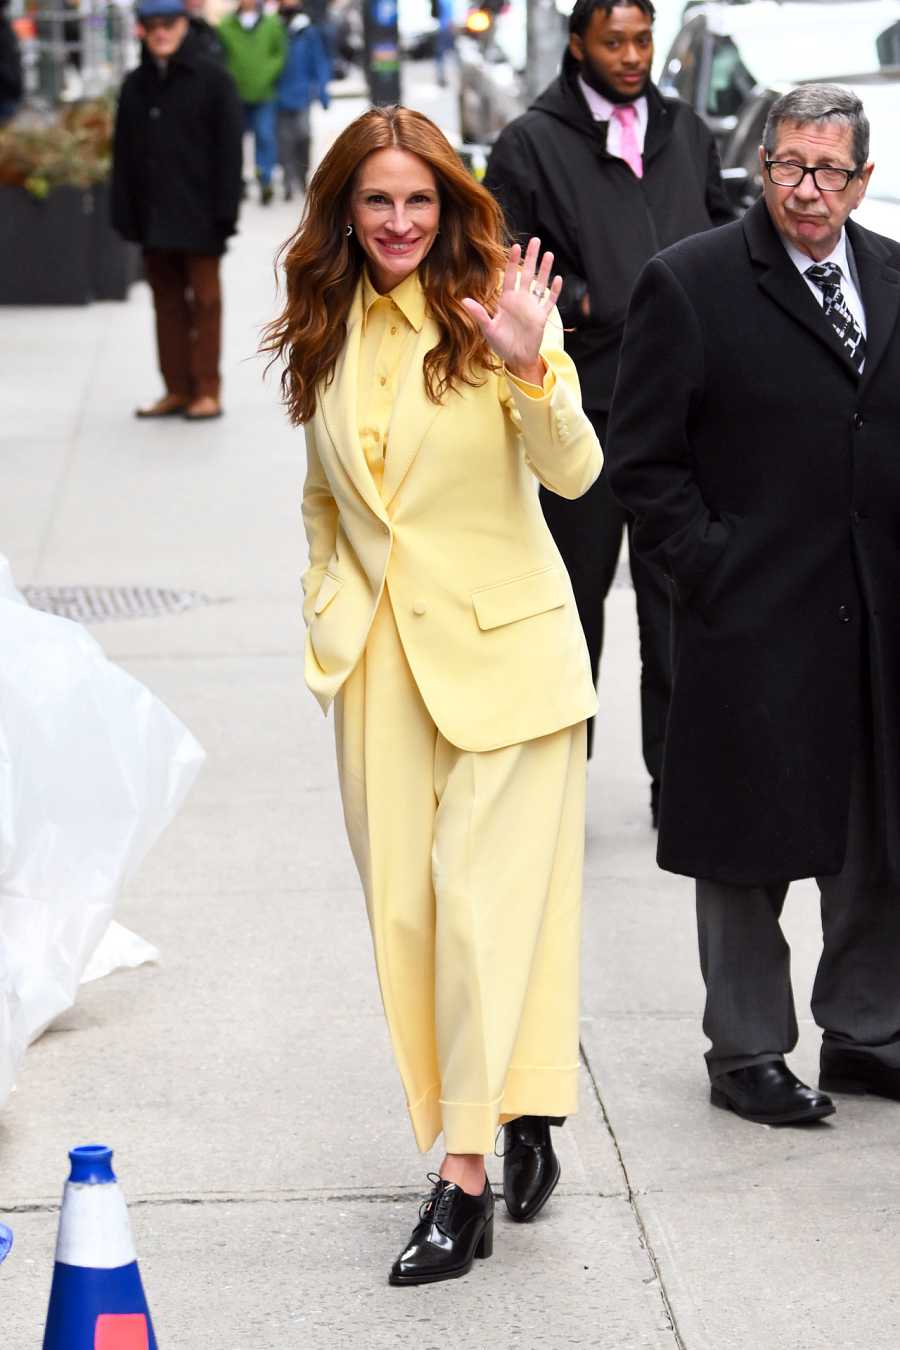 Julia Roberts brings color to the streets of New York with this yellow Gucci suit